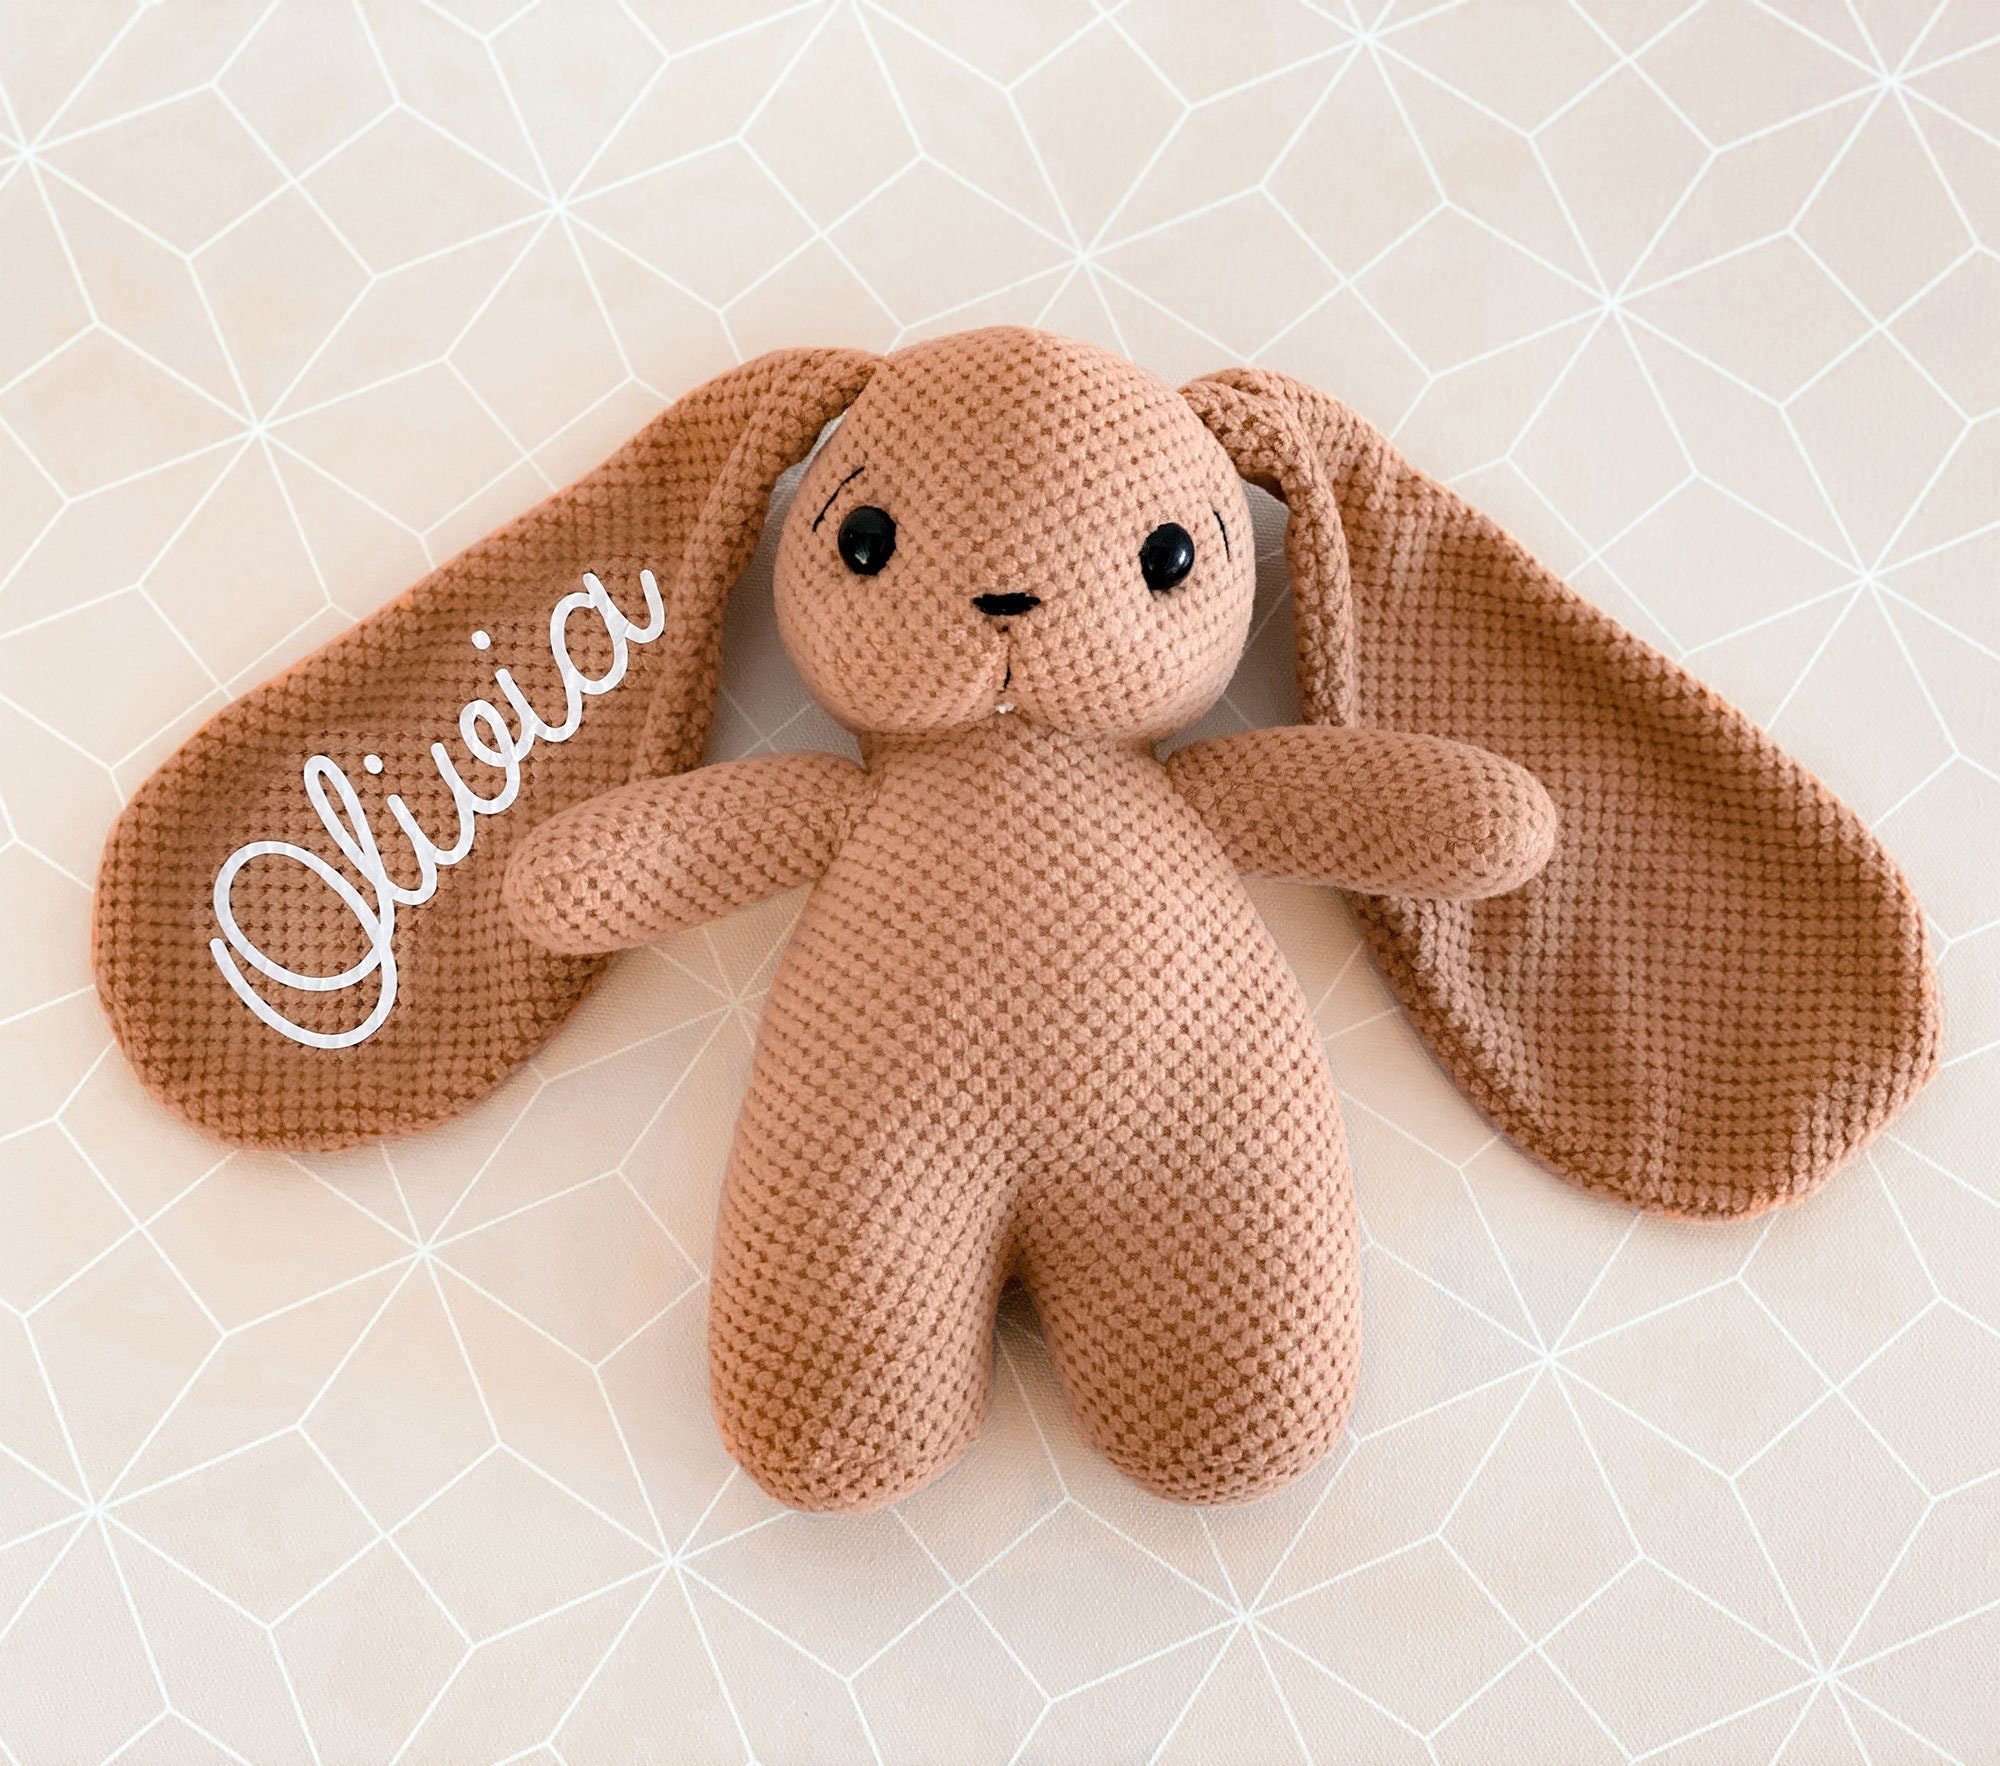 ❤️Buy 2 FREE SHIPPING❤️Personalized Bunny Rabbit Plush Flower Girl Proposal Gifts for Toddlers Little Girls Birthday Gift Stuffed Animal